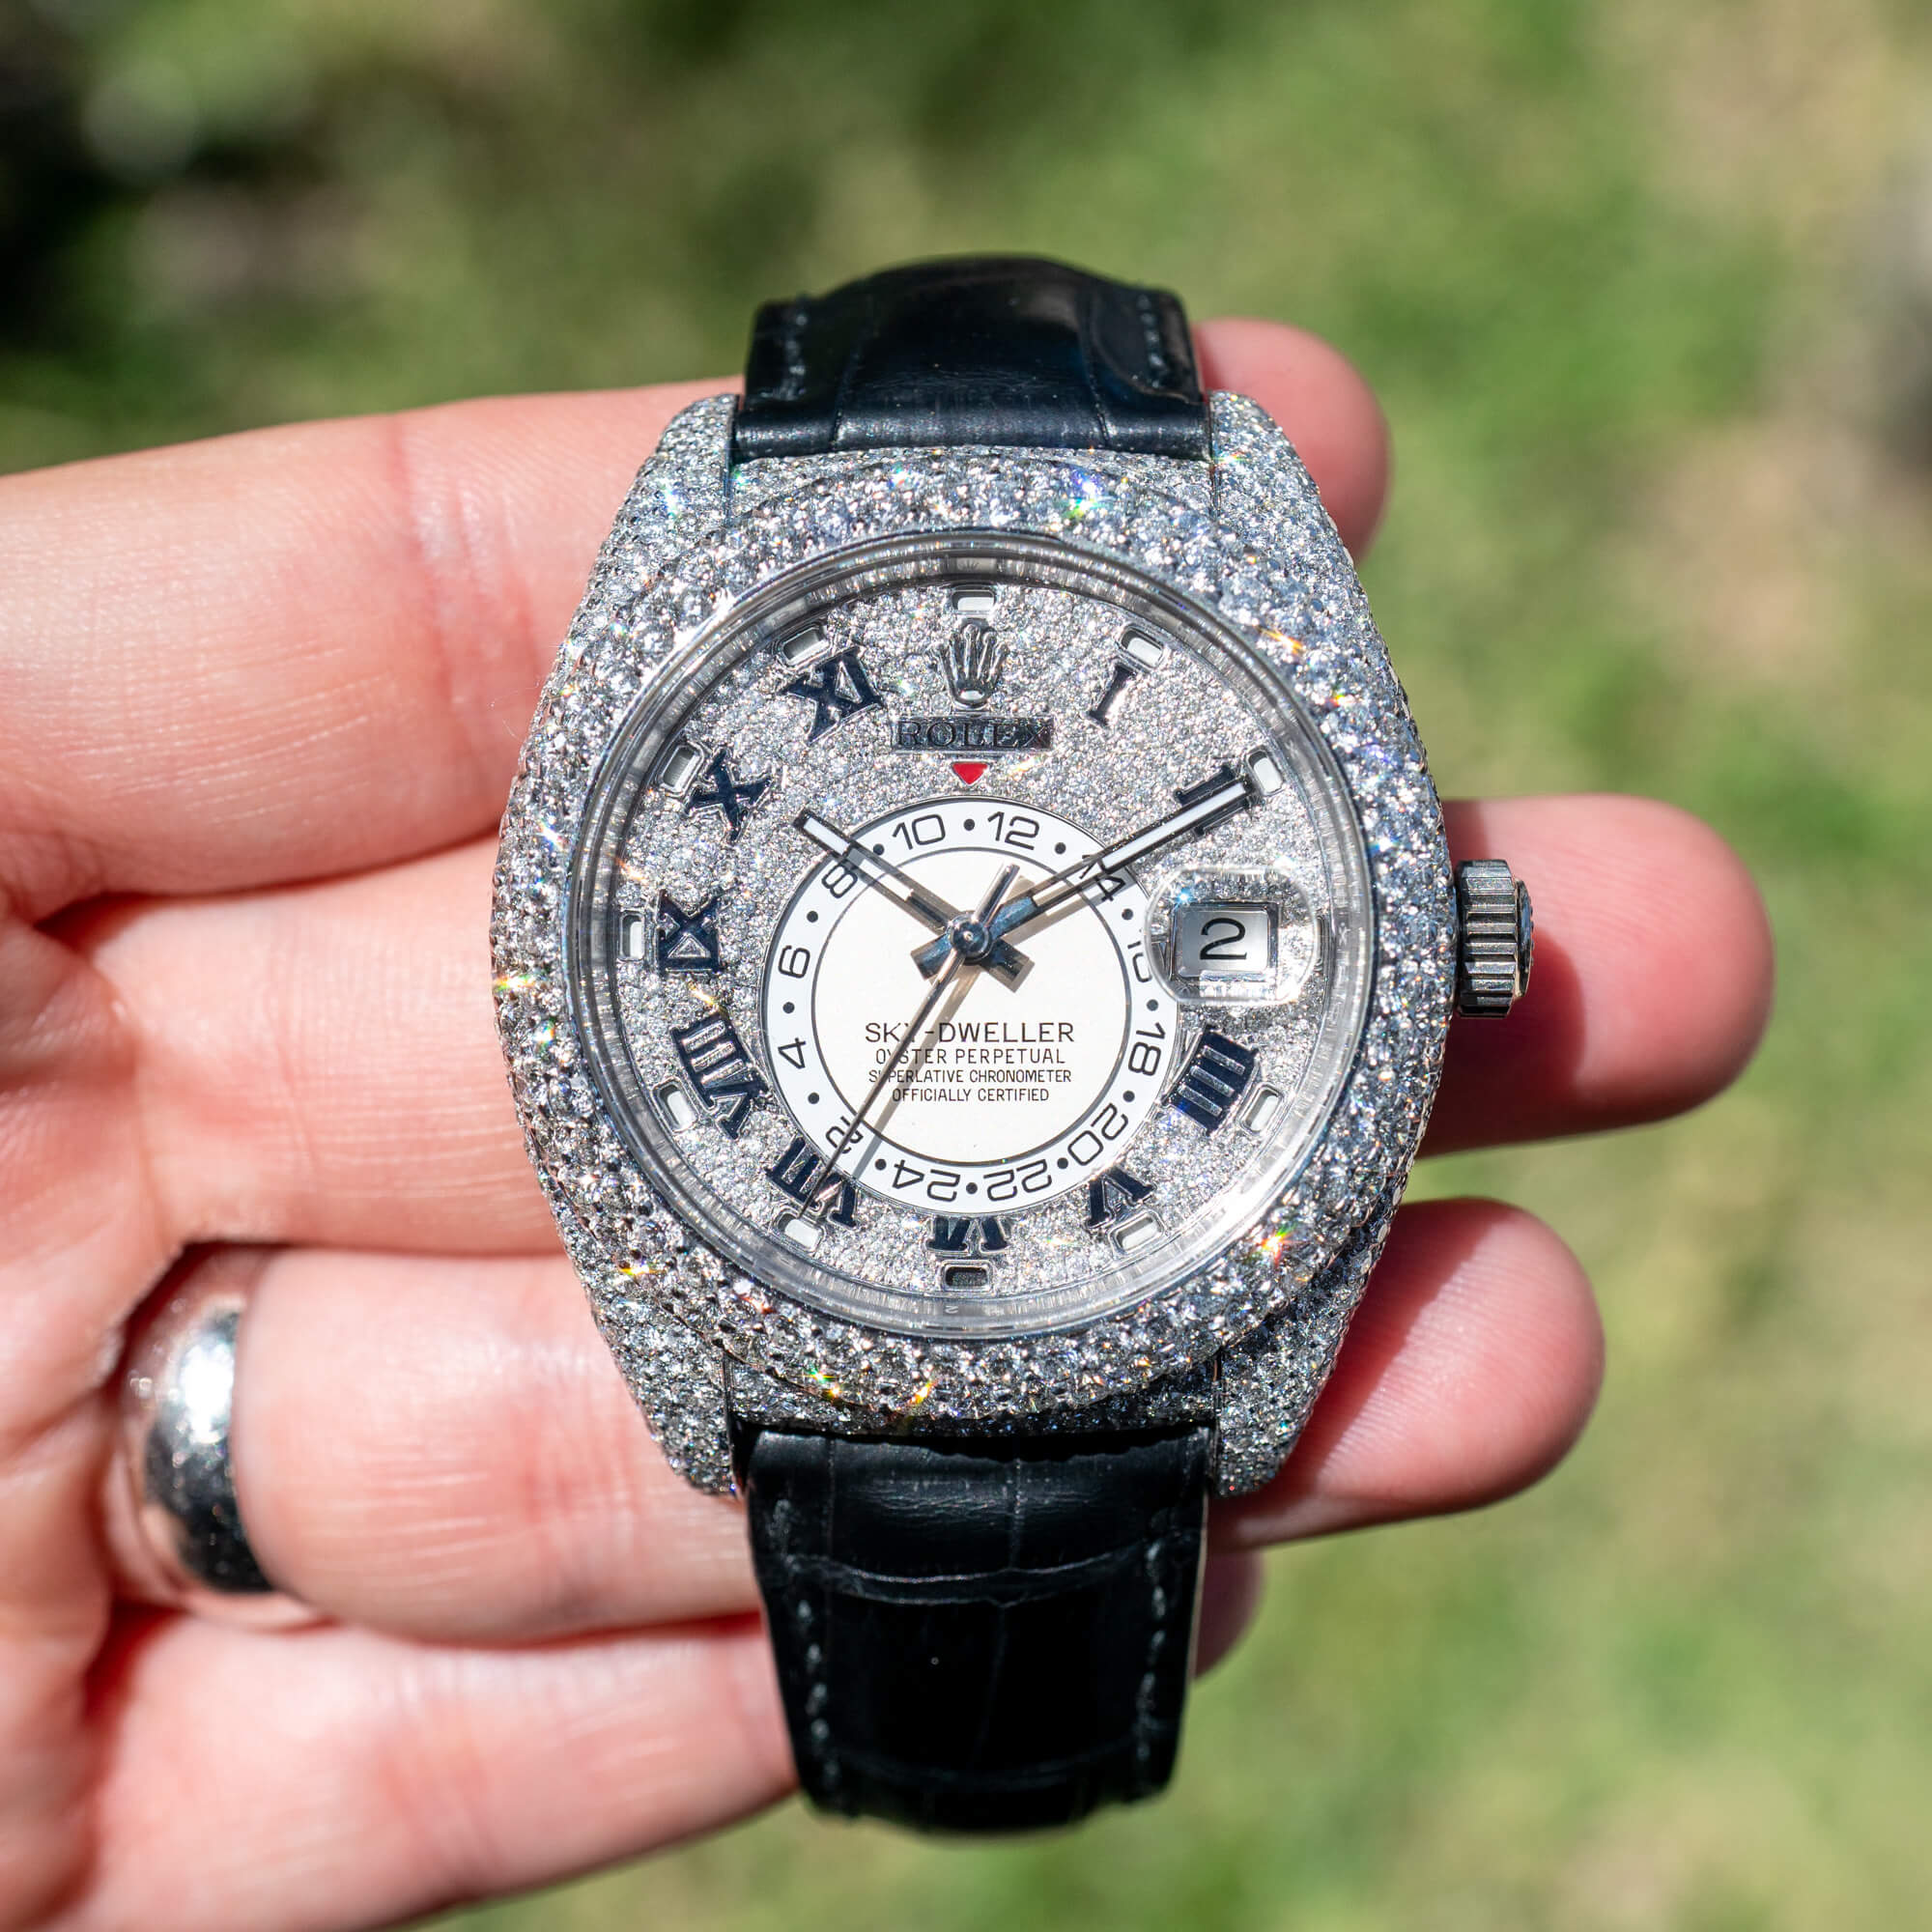 Standard forene Høne Review: First-Ever Fully Iced Out White Gold Rolex Sky-Dweller ref 326139